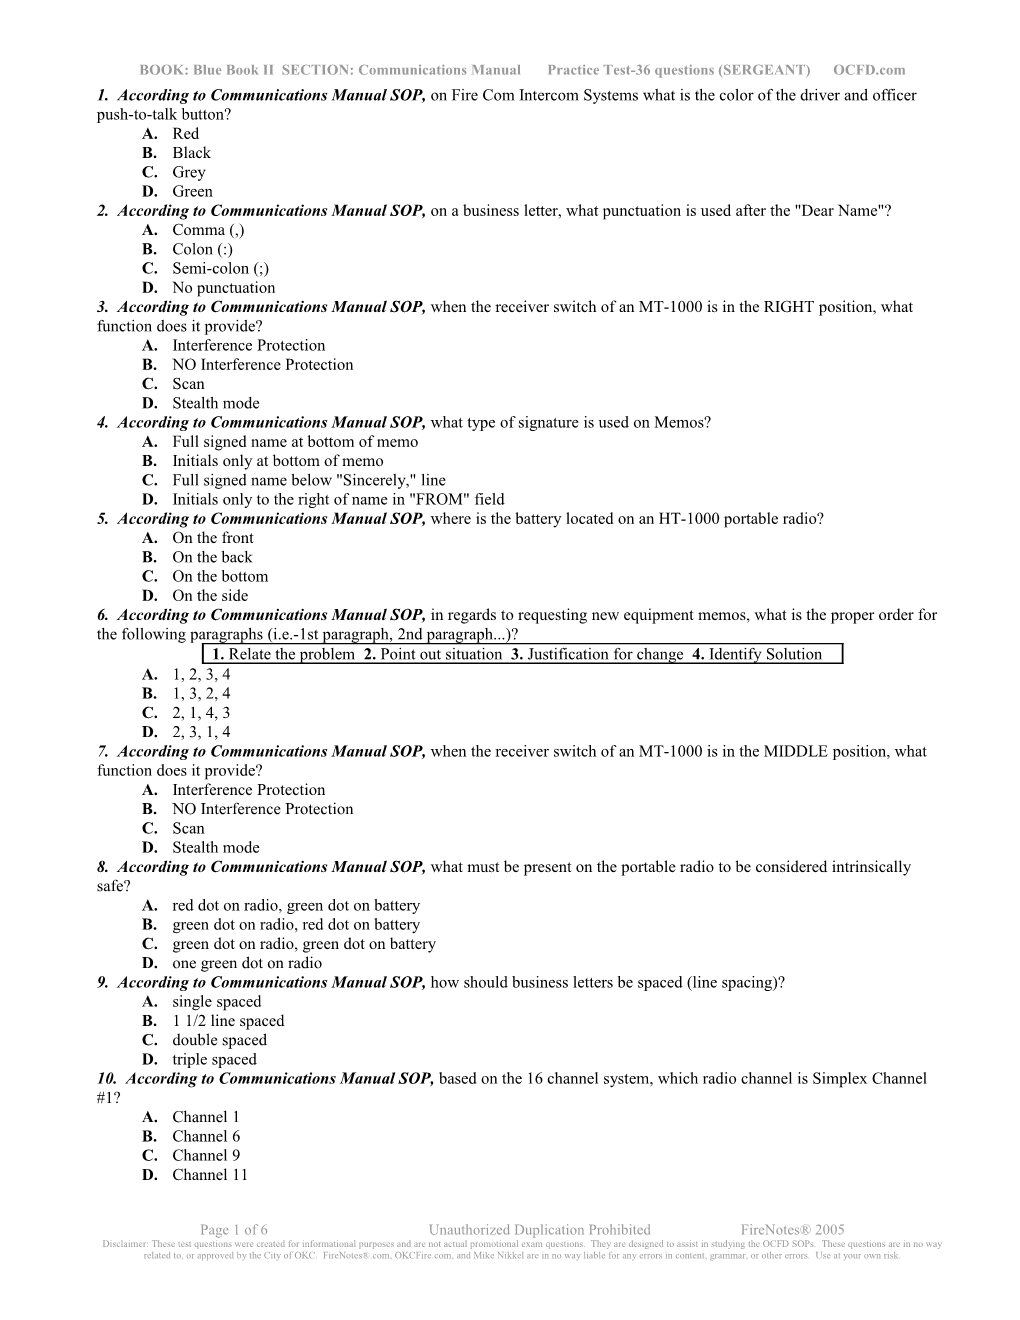 BOOK: Blue Book II SECTION: Communications Manual Practice Test-36 Questions (SERGEANT)